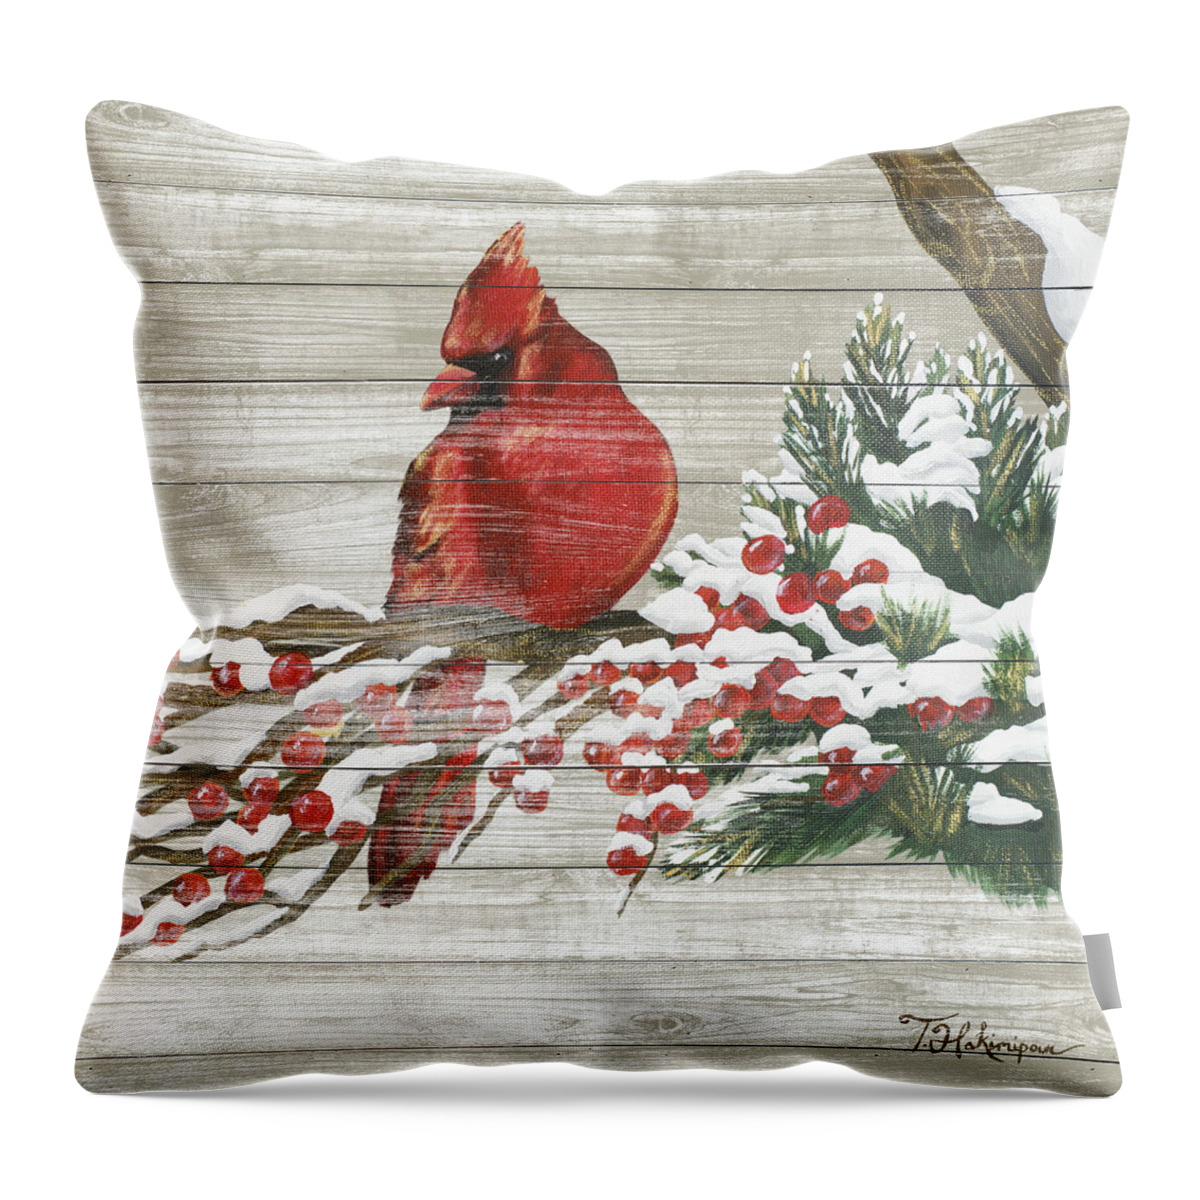 Winter Throw Pillow featuring the painting Winter Red Bird On Wood I by Tiffany Hakimipour